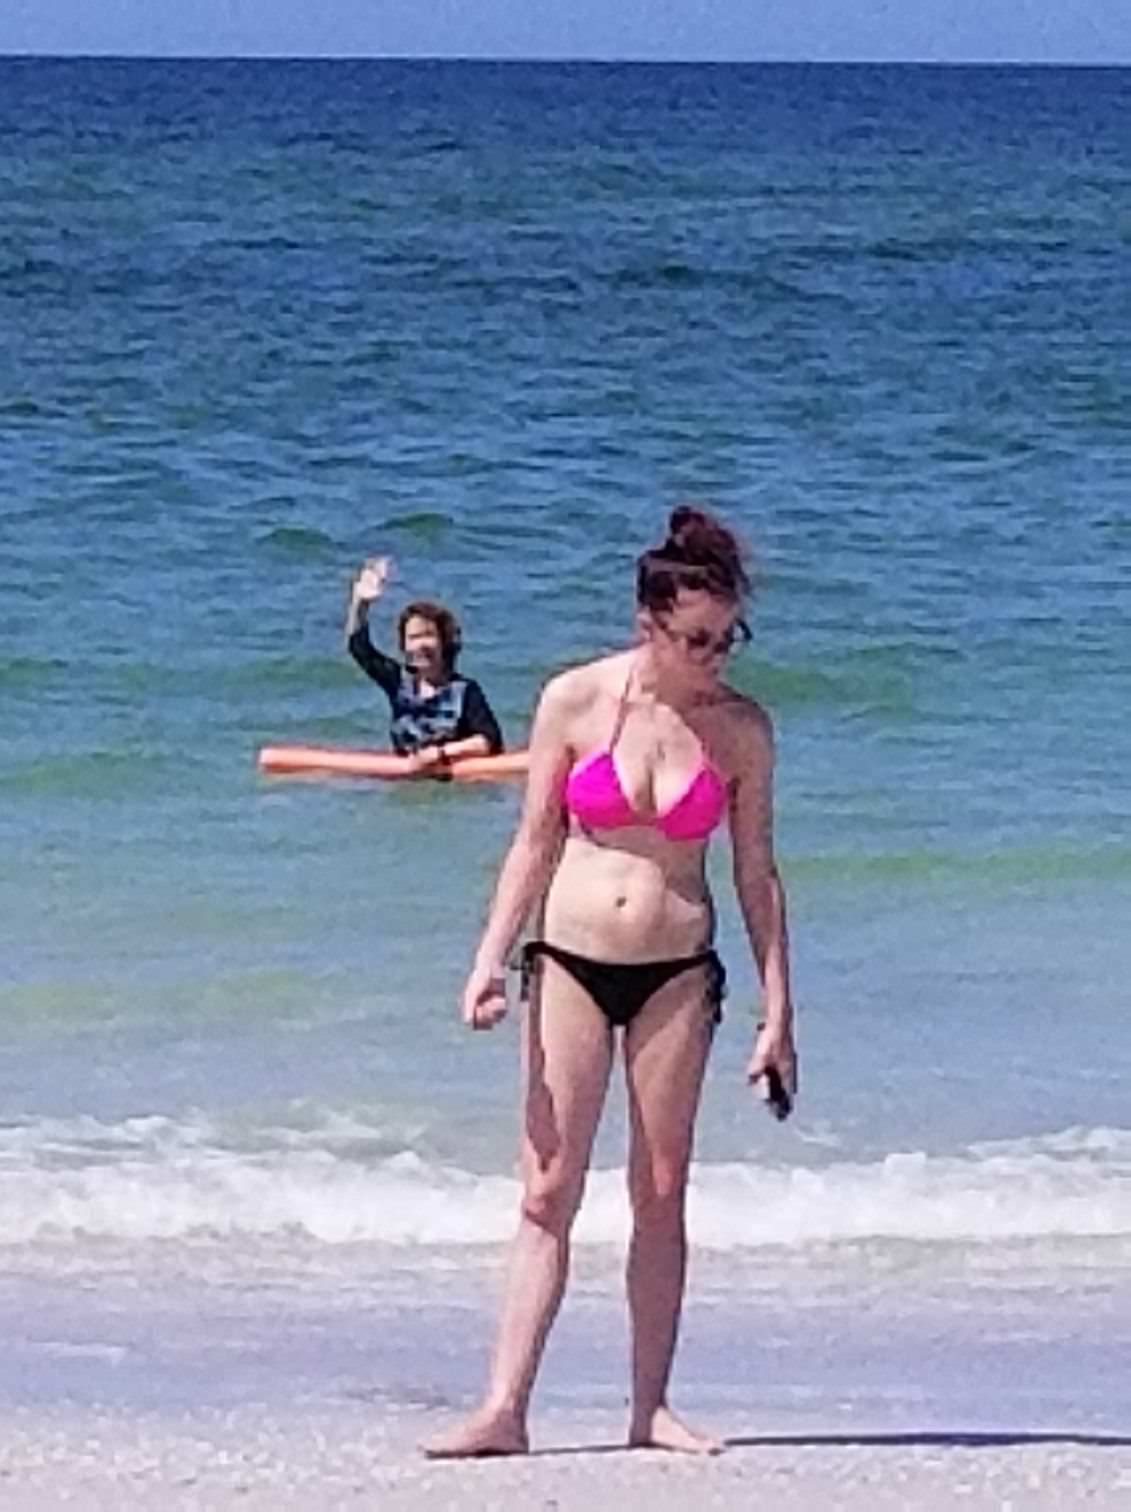 My parents are on vacation in Florida. My father graciously took a photo of my mother swimming in the ocean.